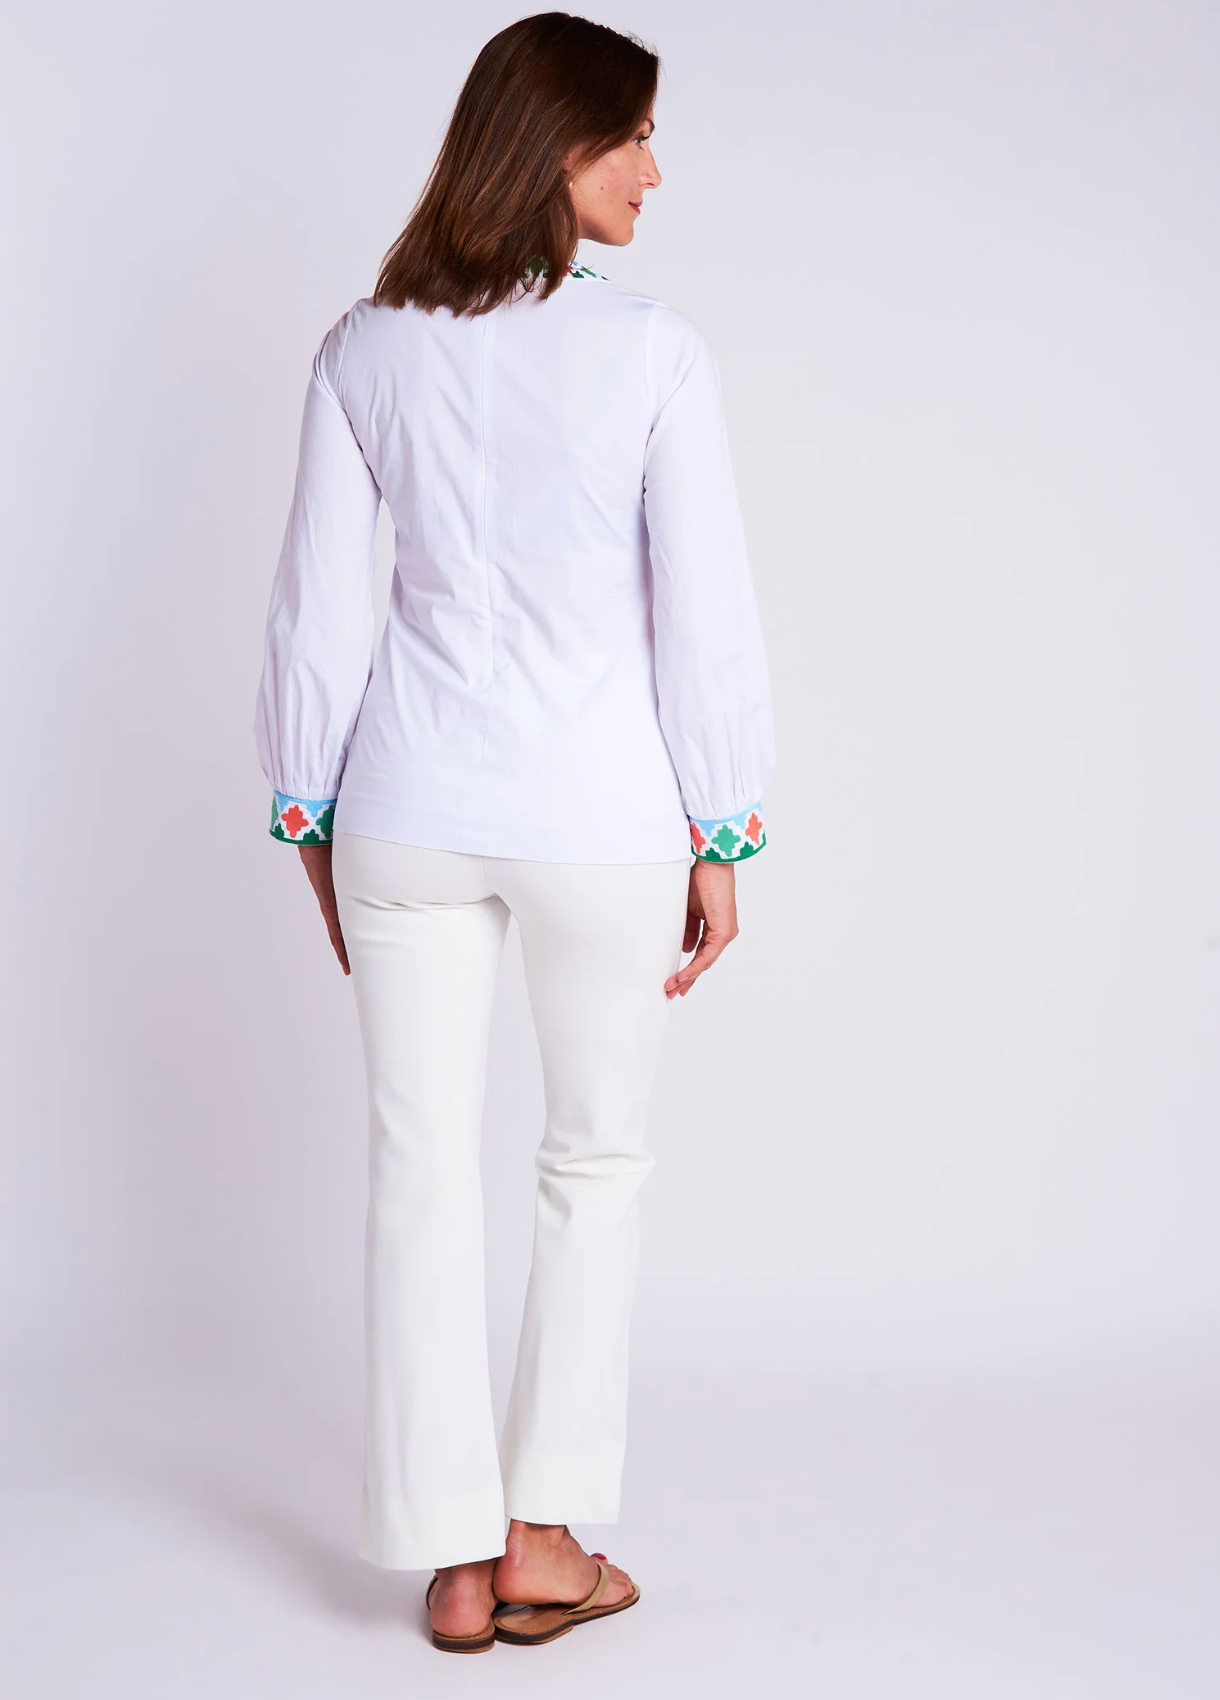 Clementine Blouse - The French Shoppe